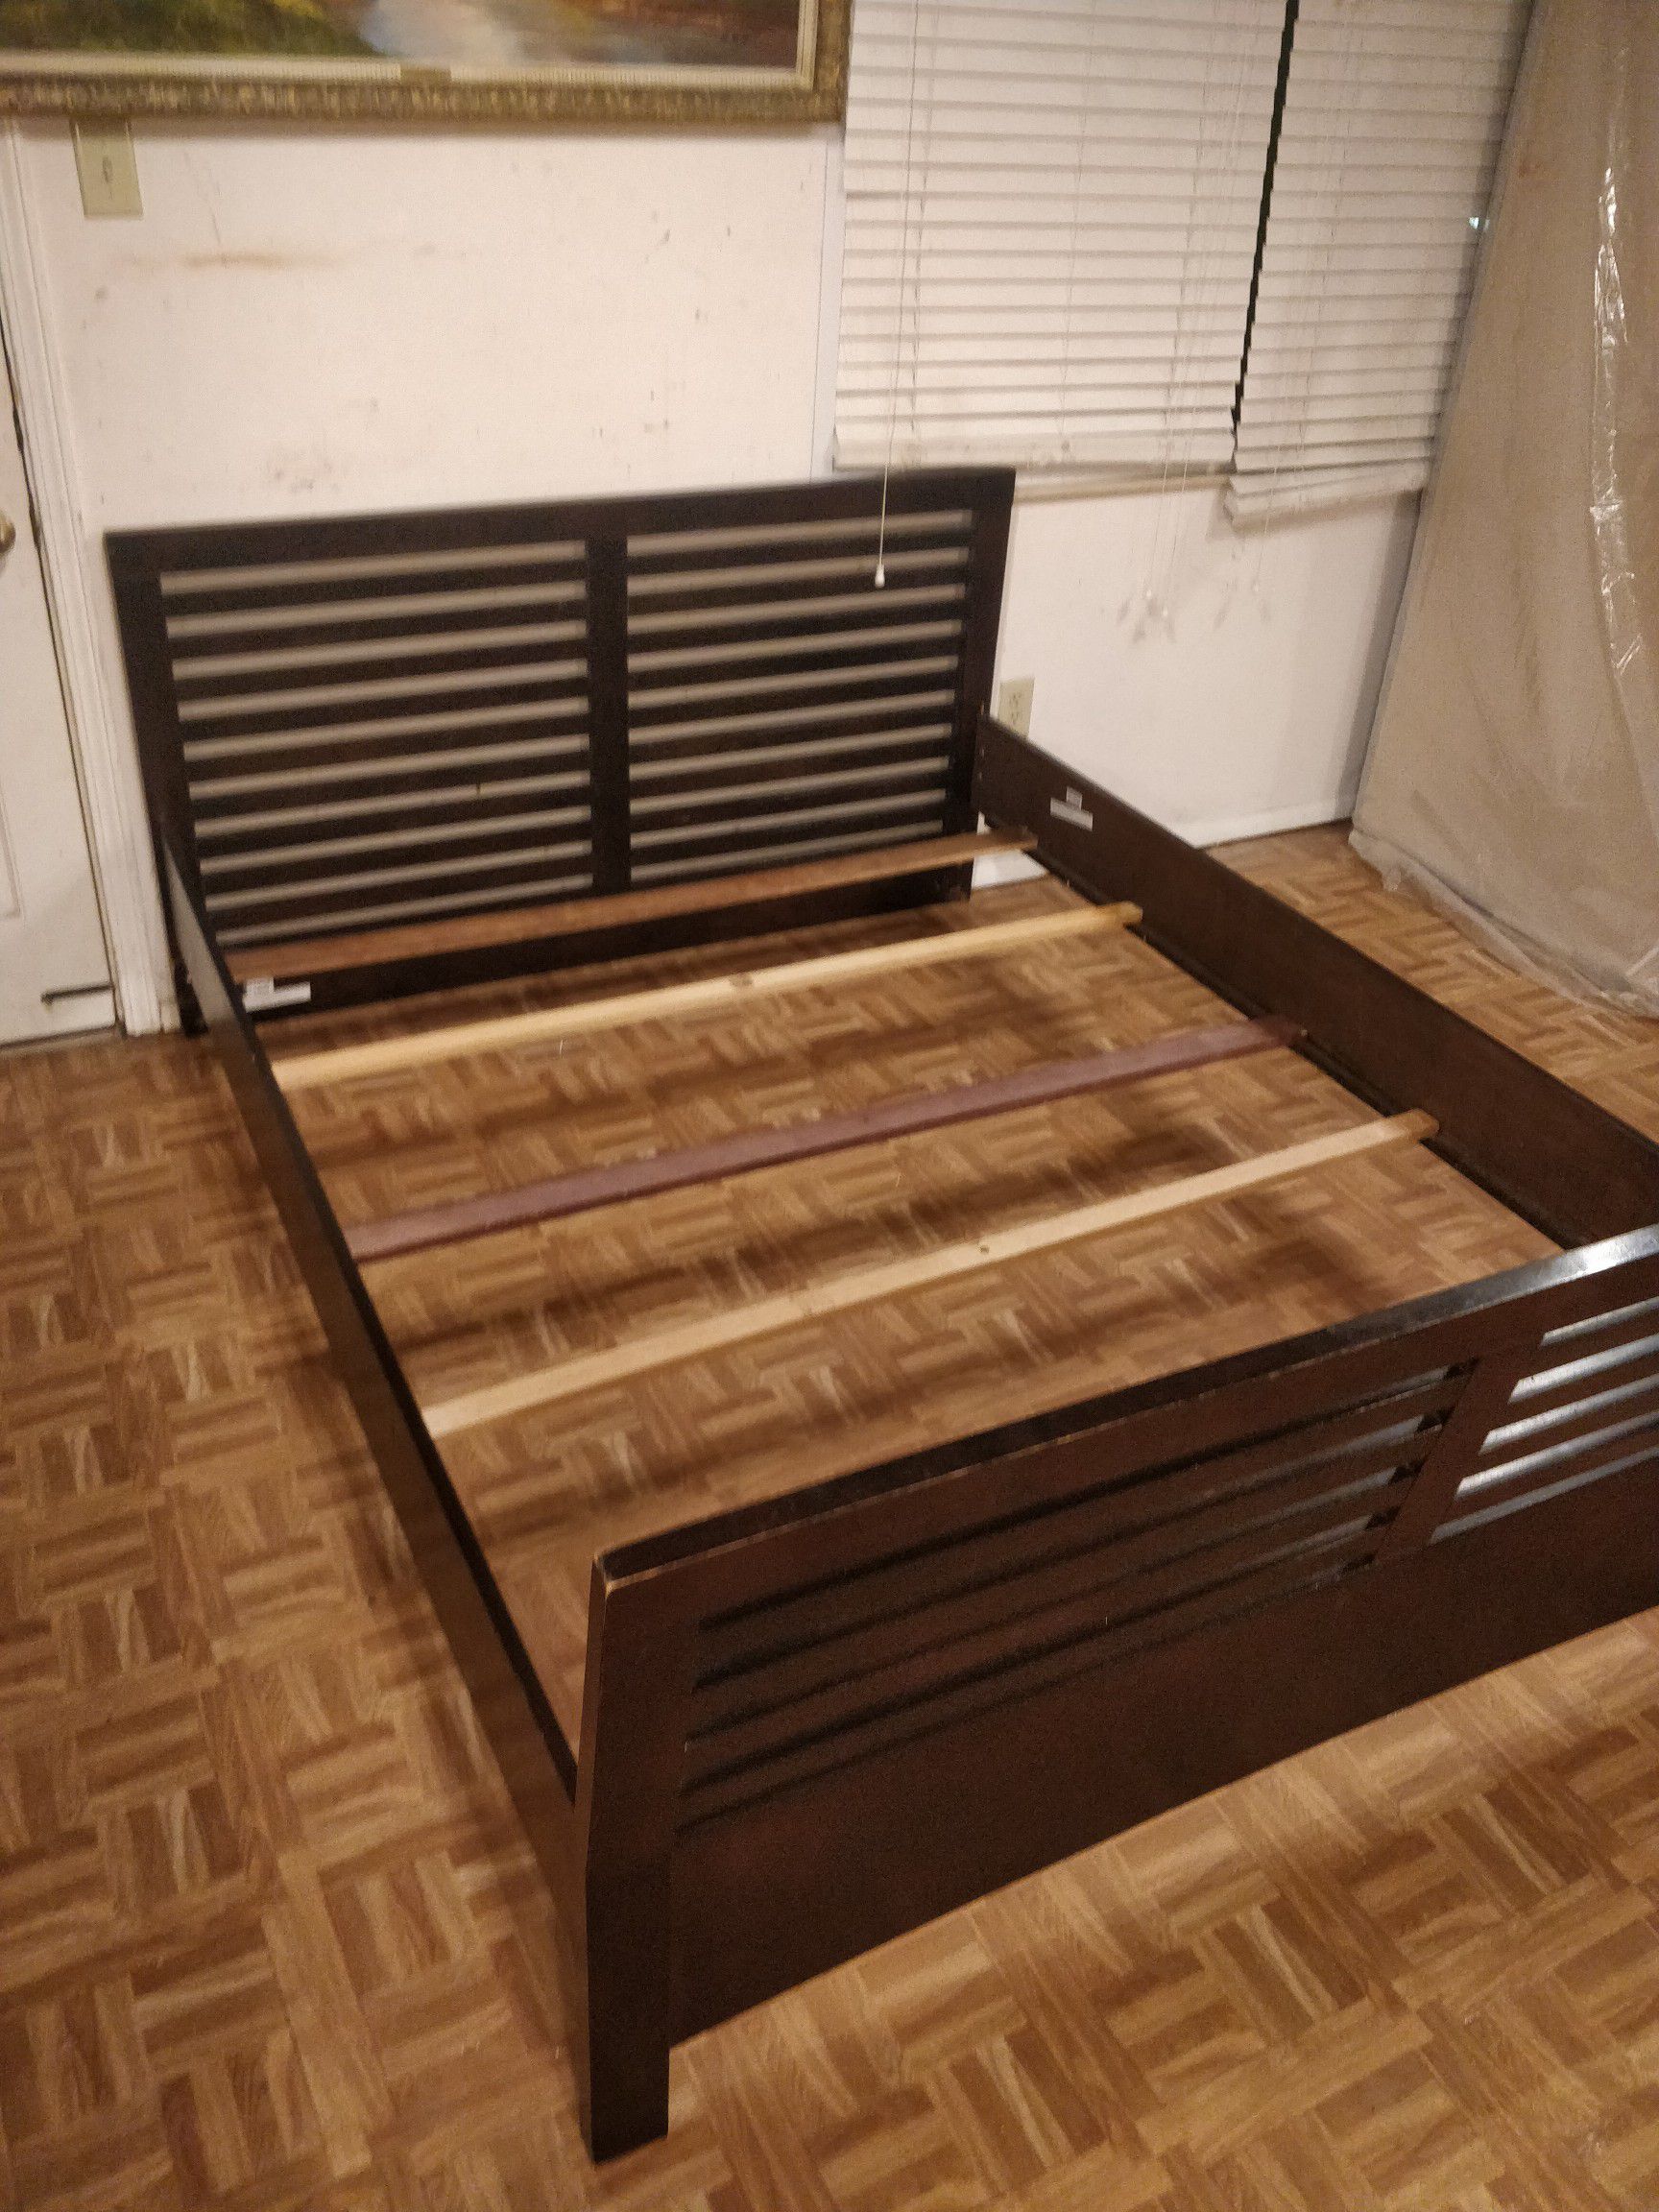 Modern Queen bed frame in good condition, pet free smoke free, driveway pickup.